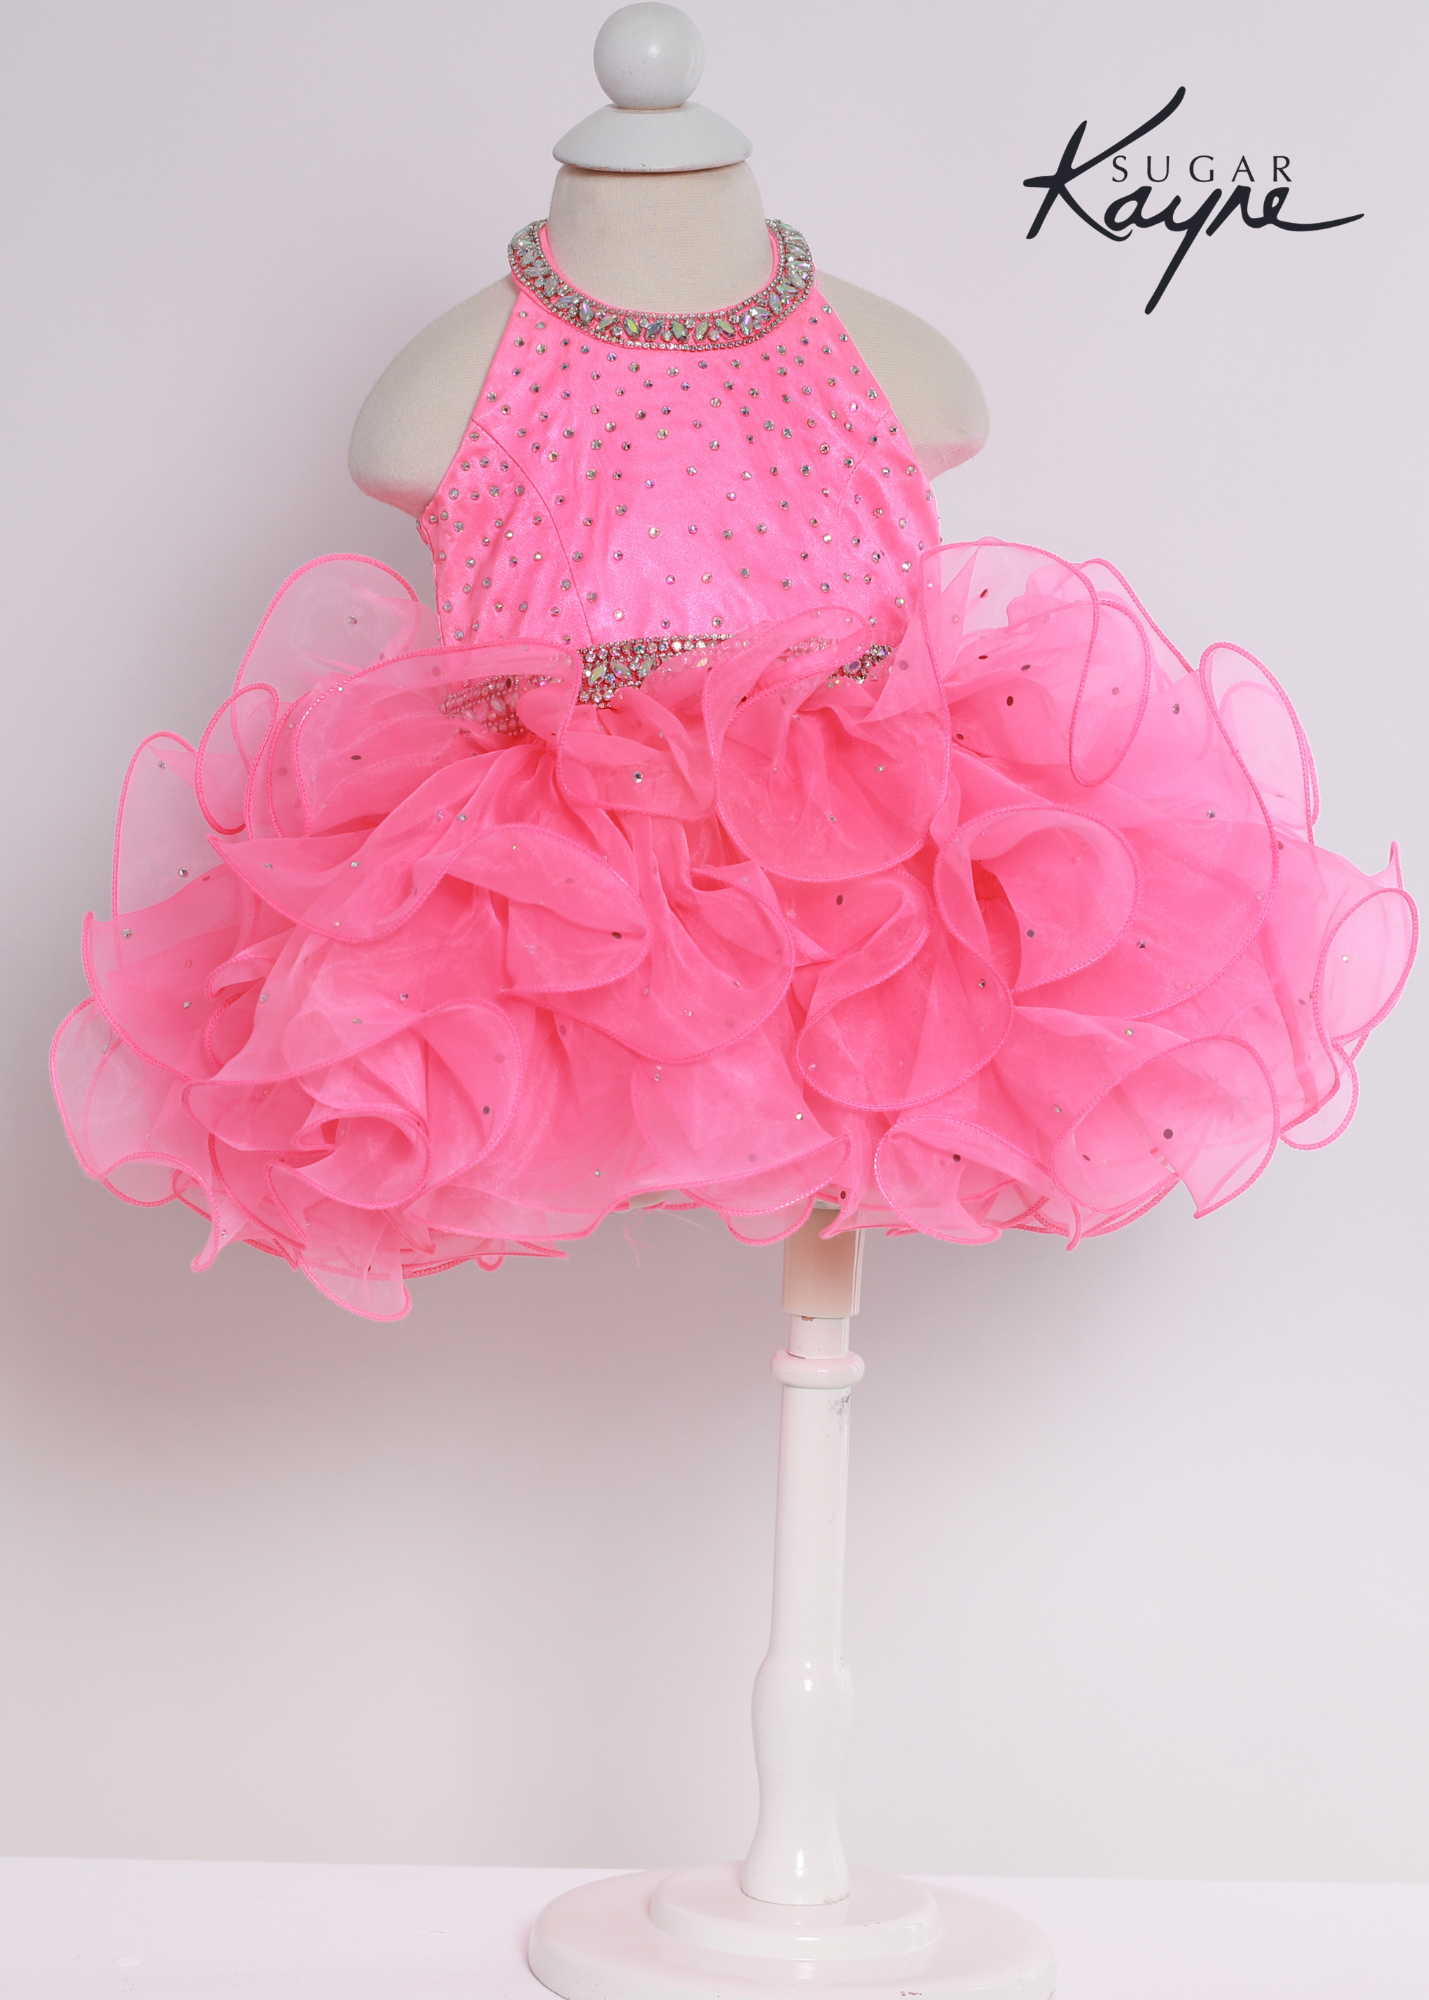 Sugar Kayne C220 Girls Baby Halter Cupcake Ruffle Pageant Dress Corset Formal Gown Have your little cupcake bring on all the charm in this stunning organza gown. The corset back is the perfect addition as the little one grows!  Colors: Bubblegum, Neon Orange, White  Sizes: 0M, 12M, 18M, 24M, 2T, 3T, 4T, 5T, 6M, 6T  Fabric Organza, Satin Lining